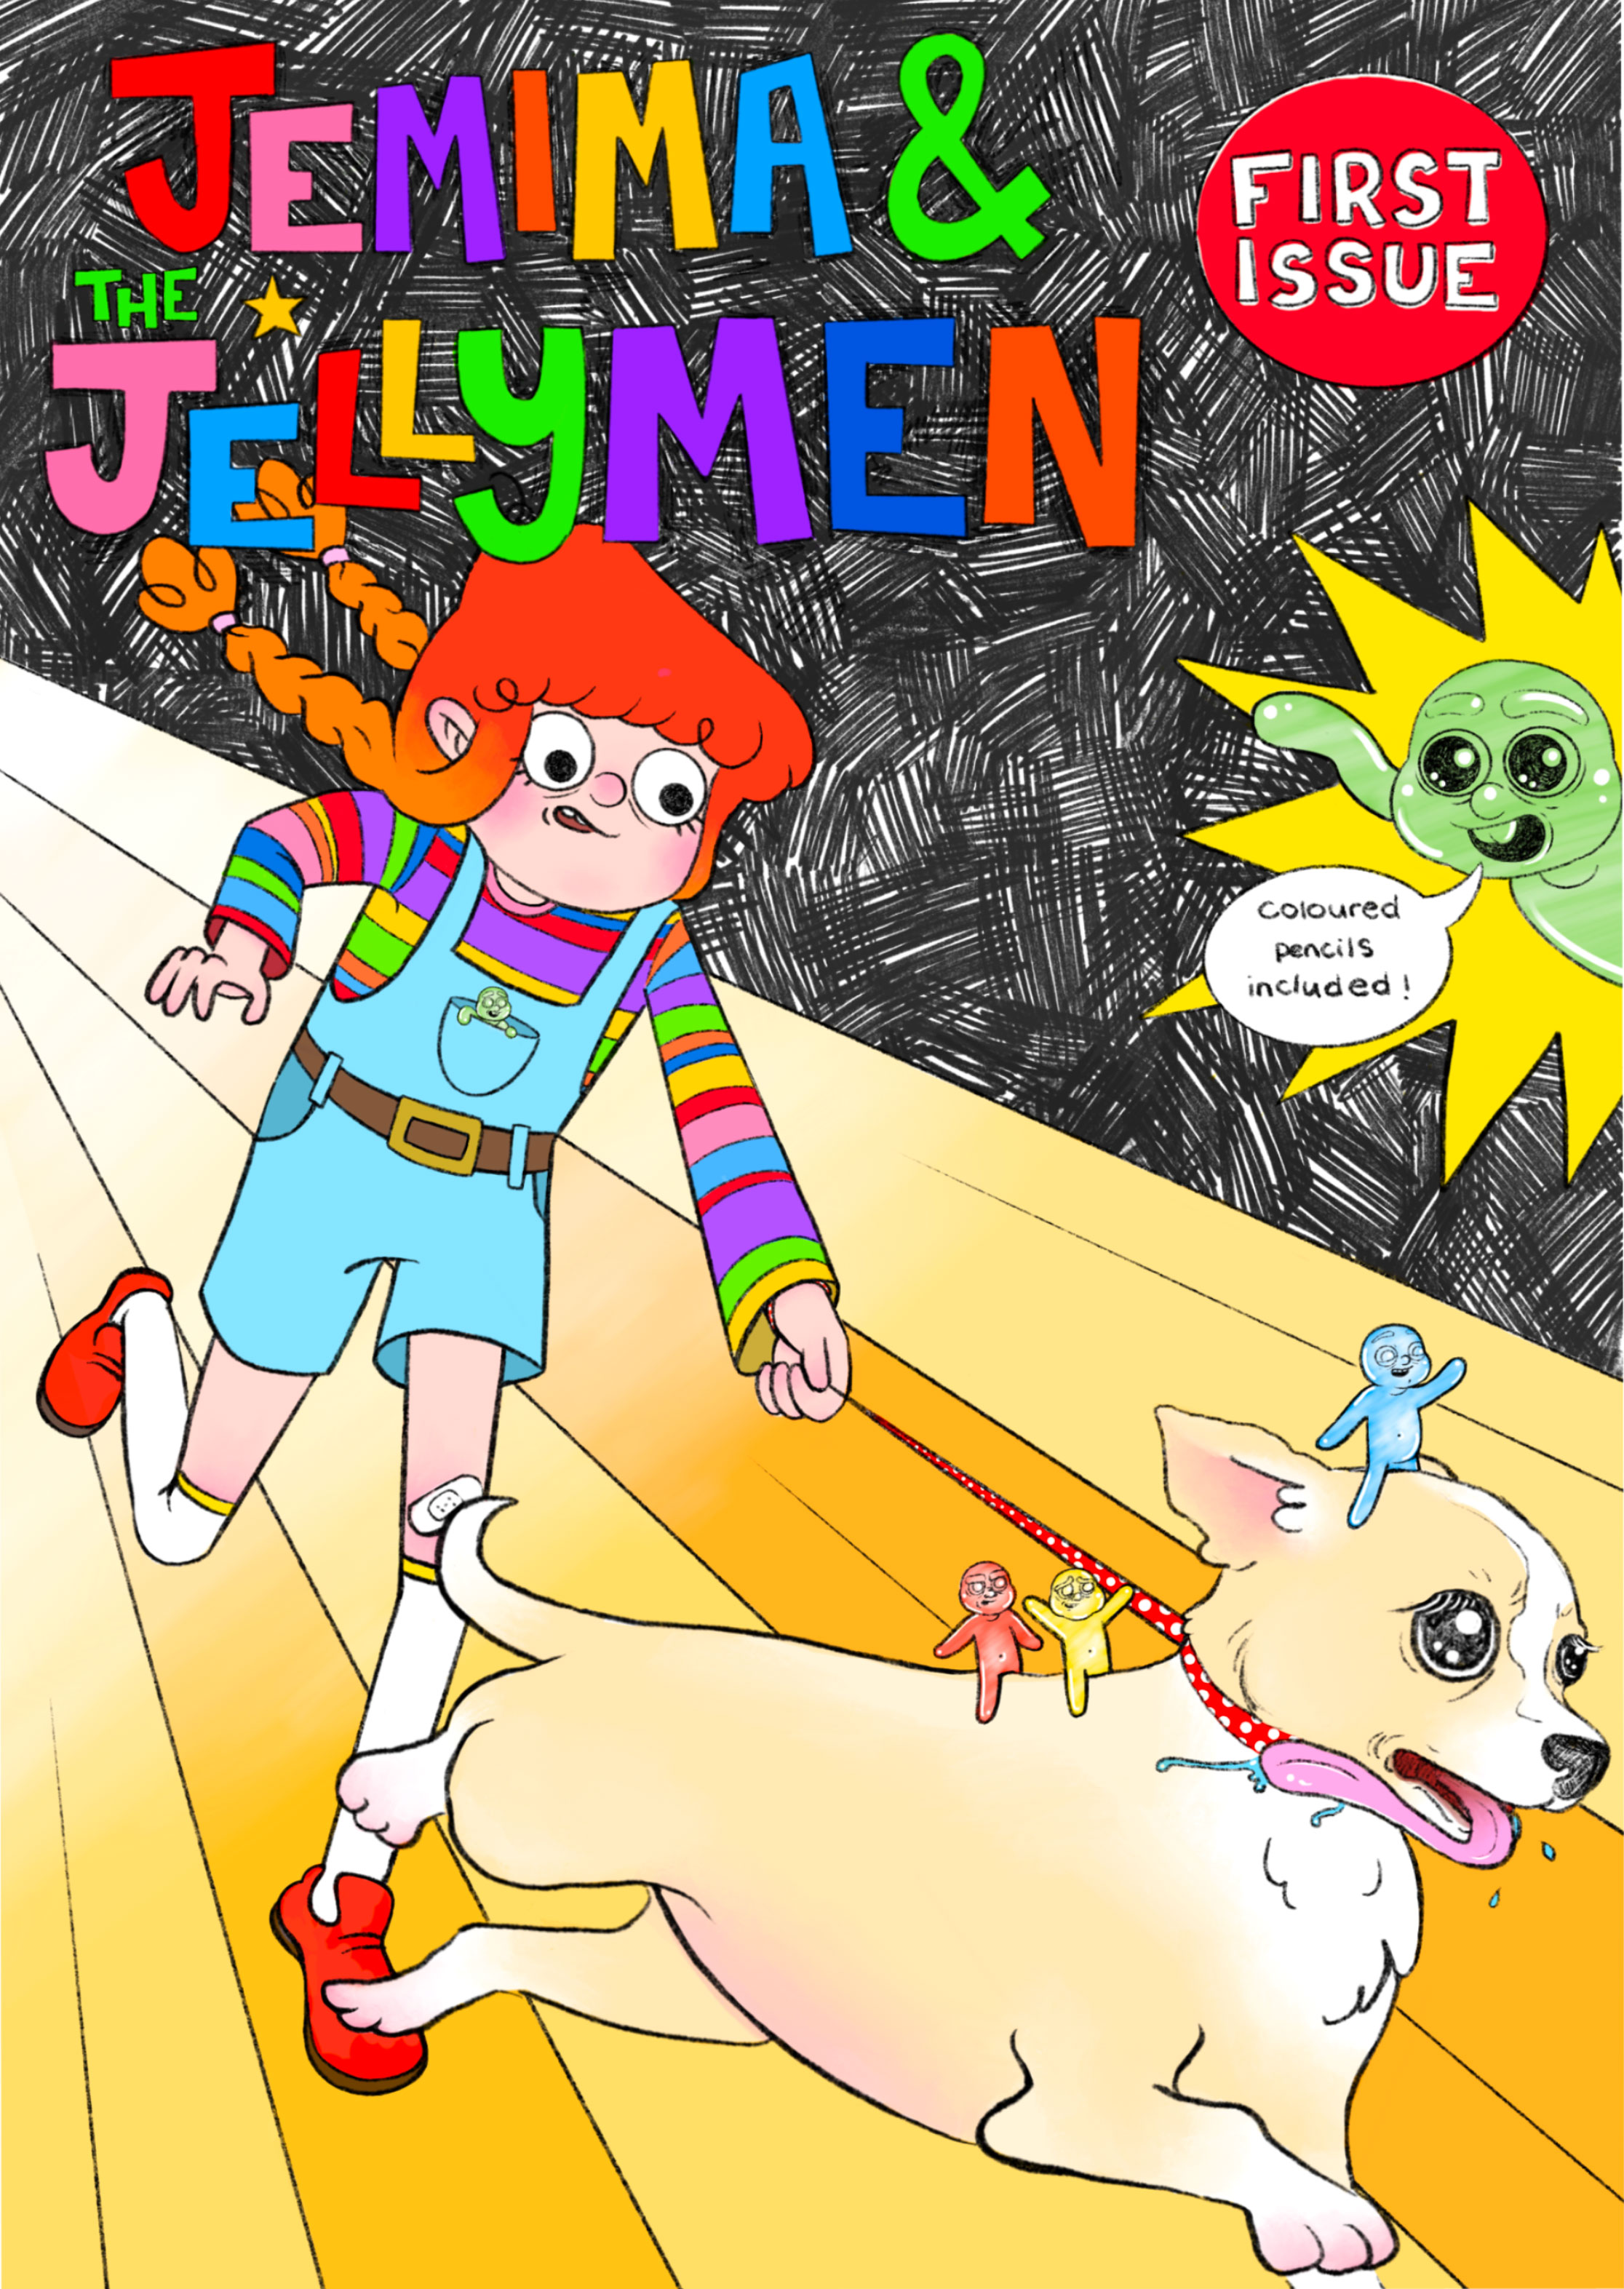 Front cover artwork for a children's interactive comic featuring an illustration of a girl and dog